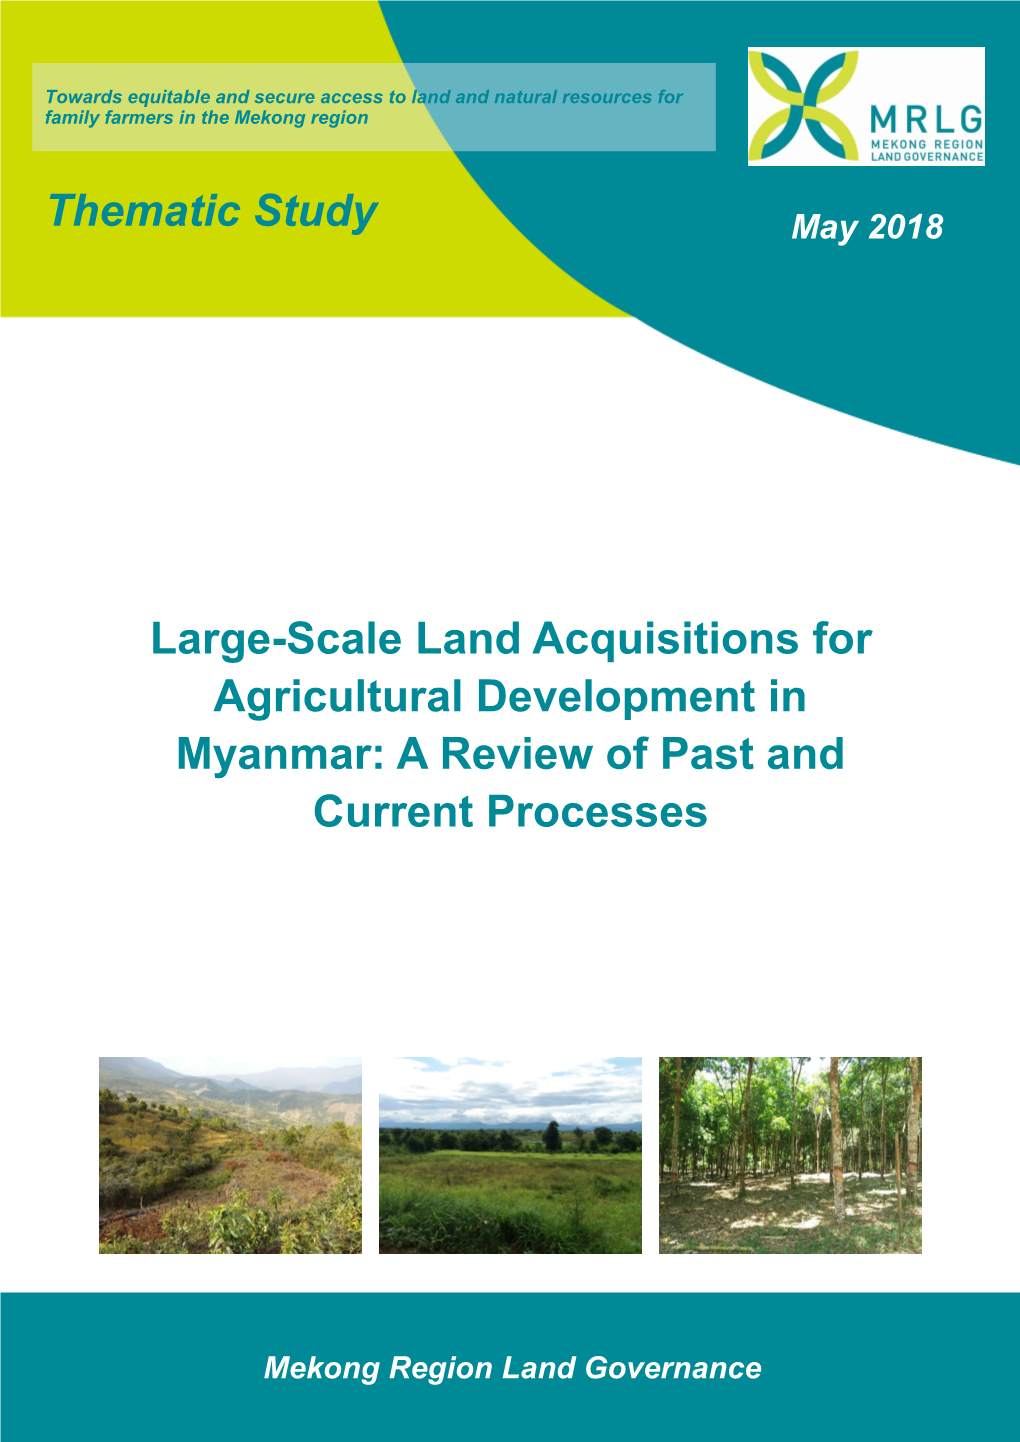 Large-Scale Land Acquisitions for Agricultural Development in Myanmar: a Review of Past and Current Processes